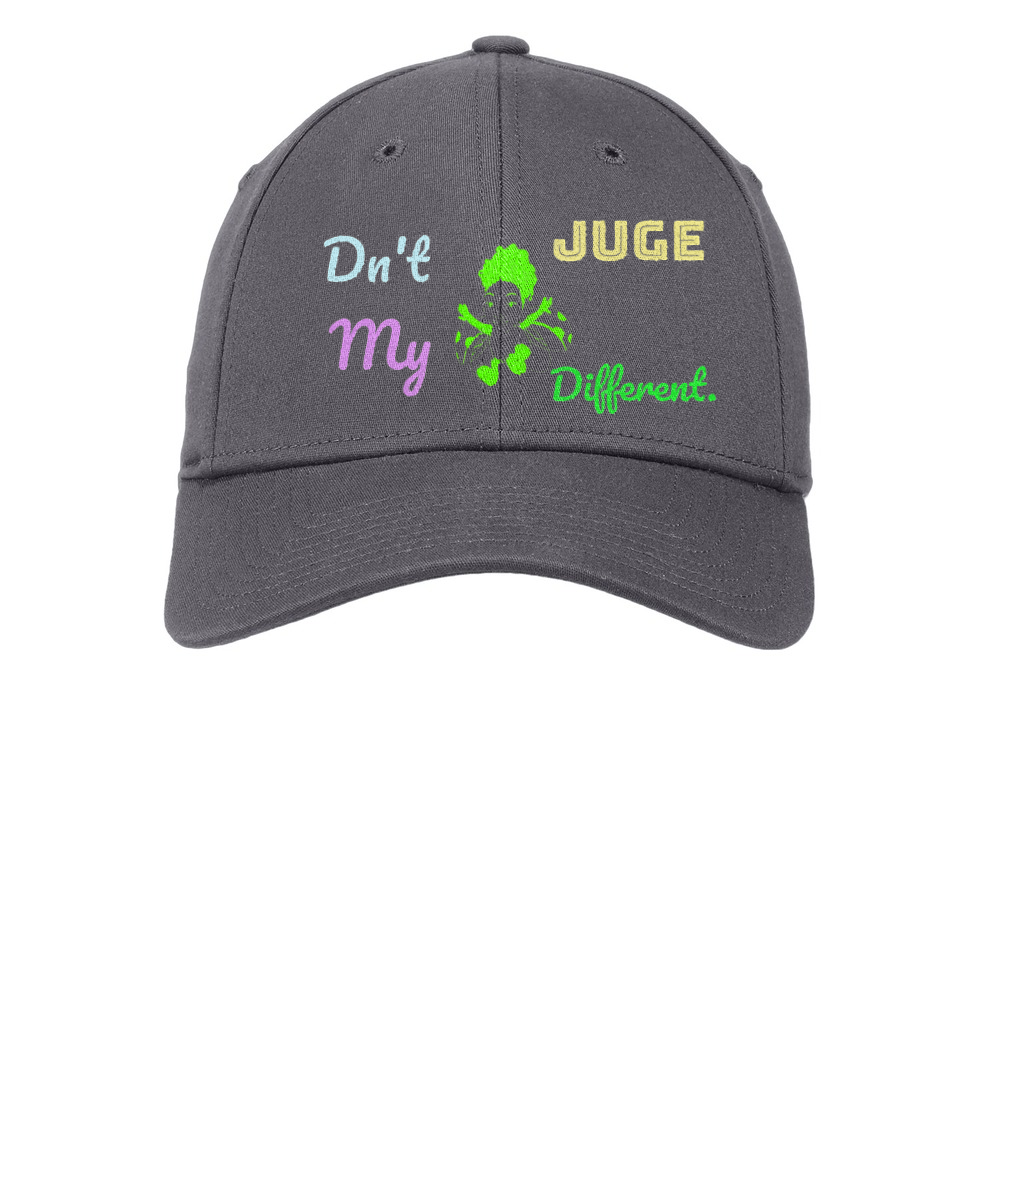 Dn't Juge My Different. Embroidered New Era  NE1000- Structured Stretch Cotton Cap